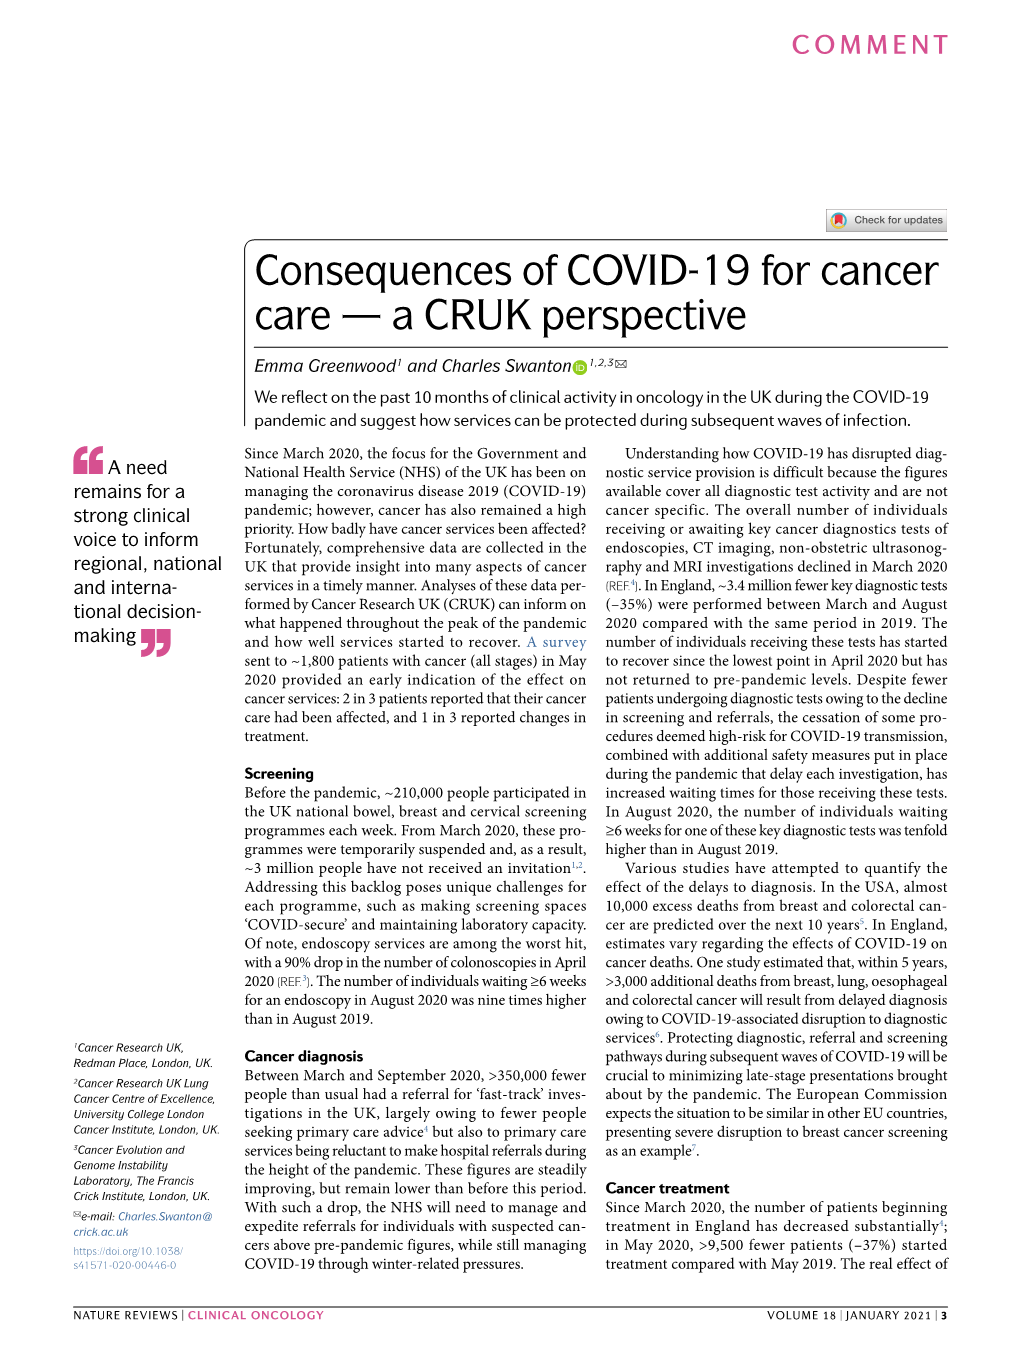 Consequences of COVID-19 for Cancer Care — a CRUK Perspective